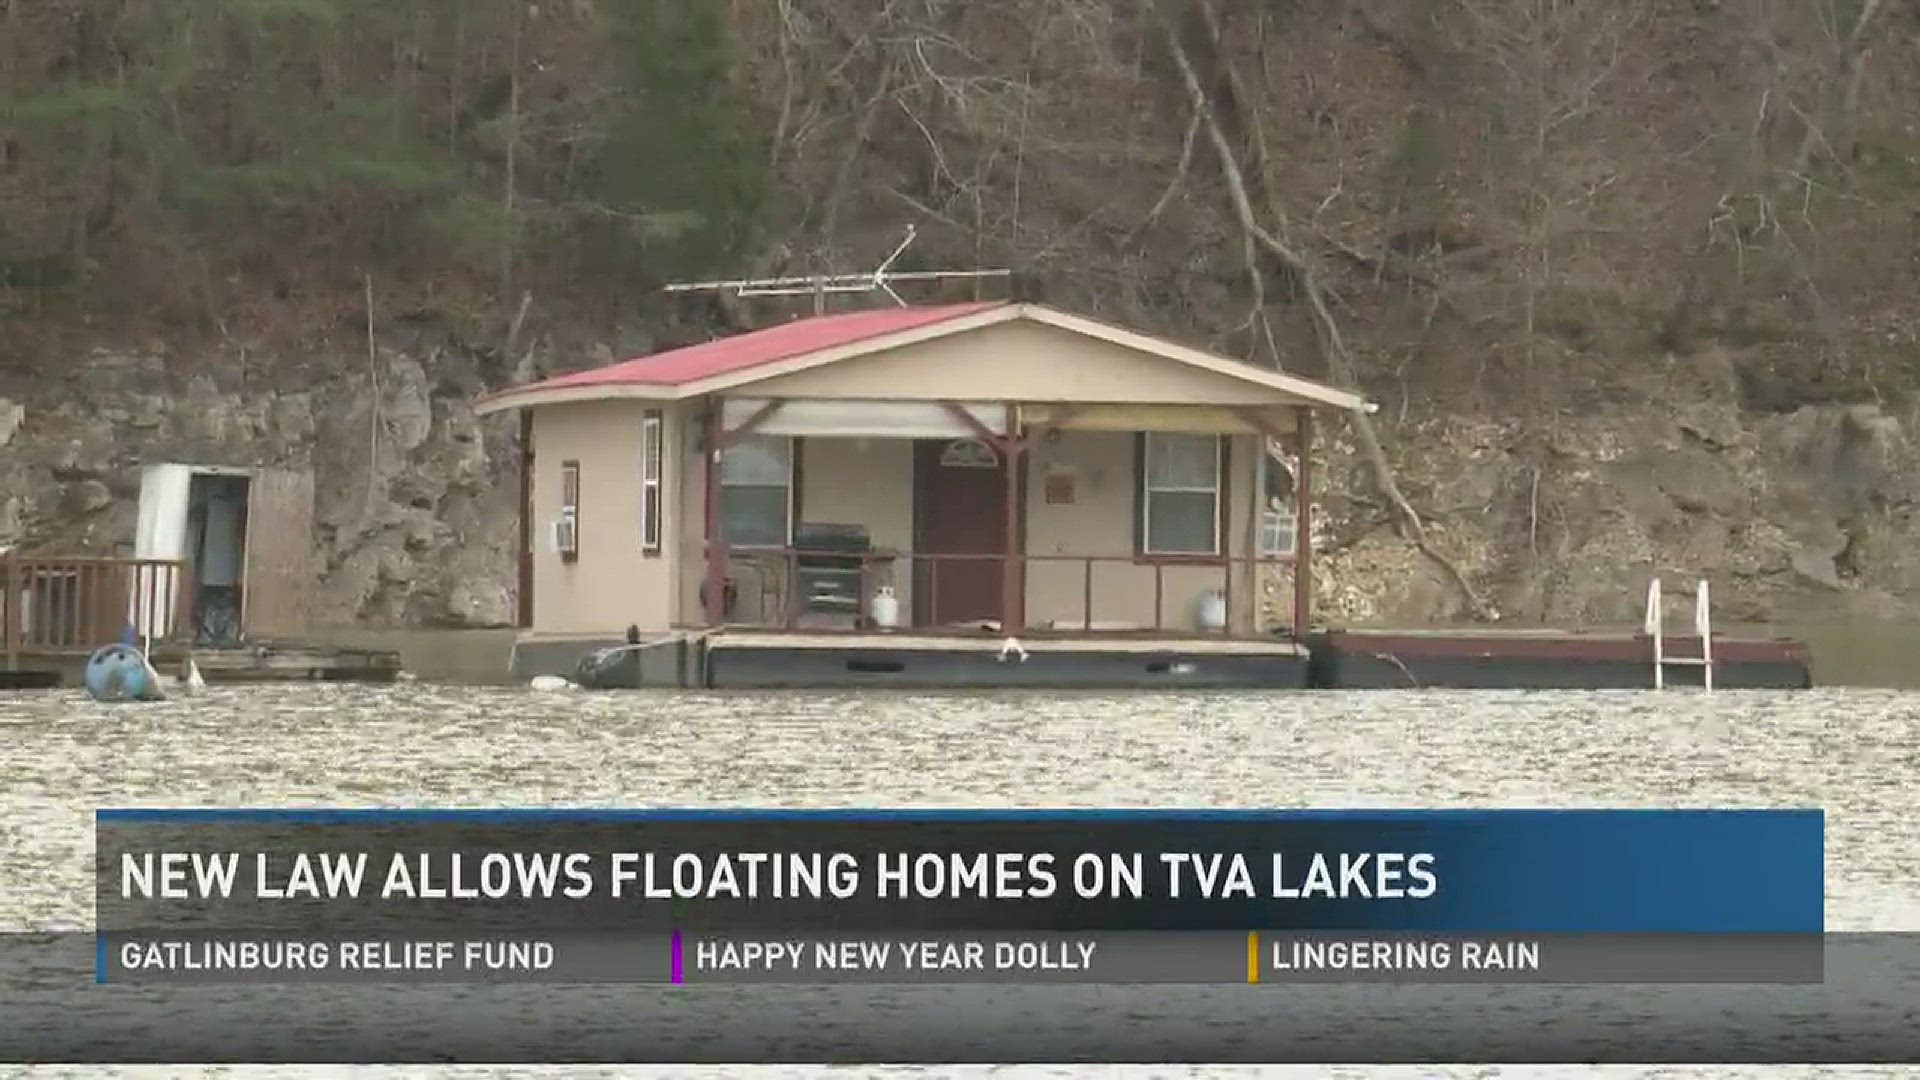 Jan. 2, 2017: President Obama signed a new law last month allowing existing floating homes to remain on TVA lakes.